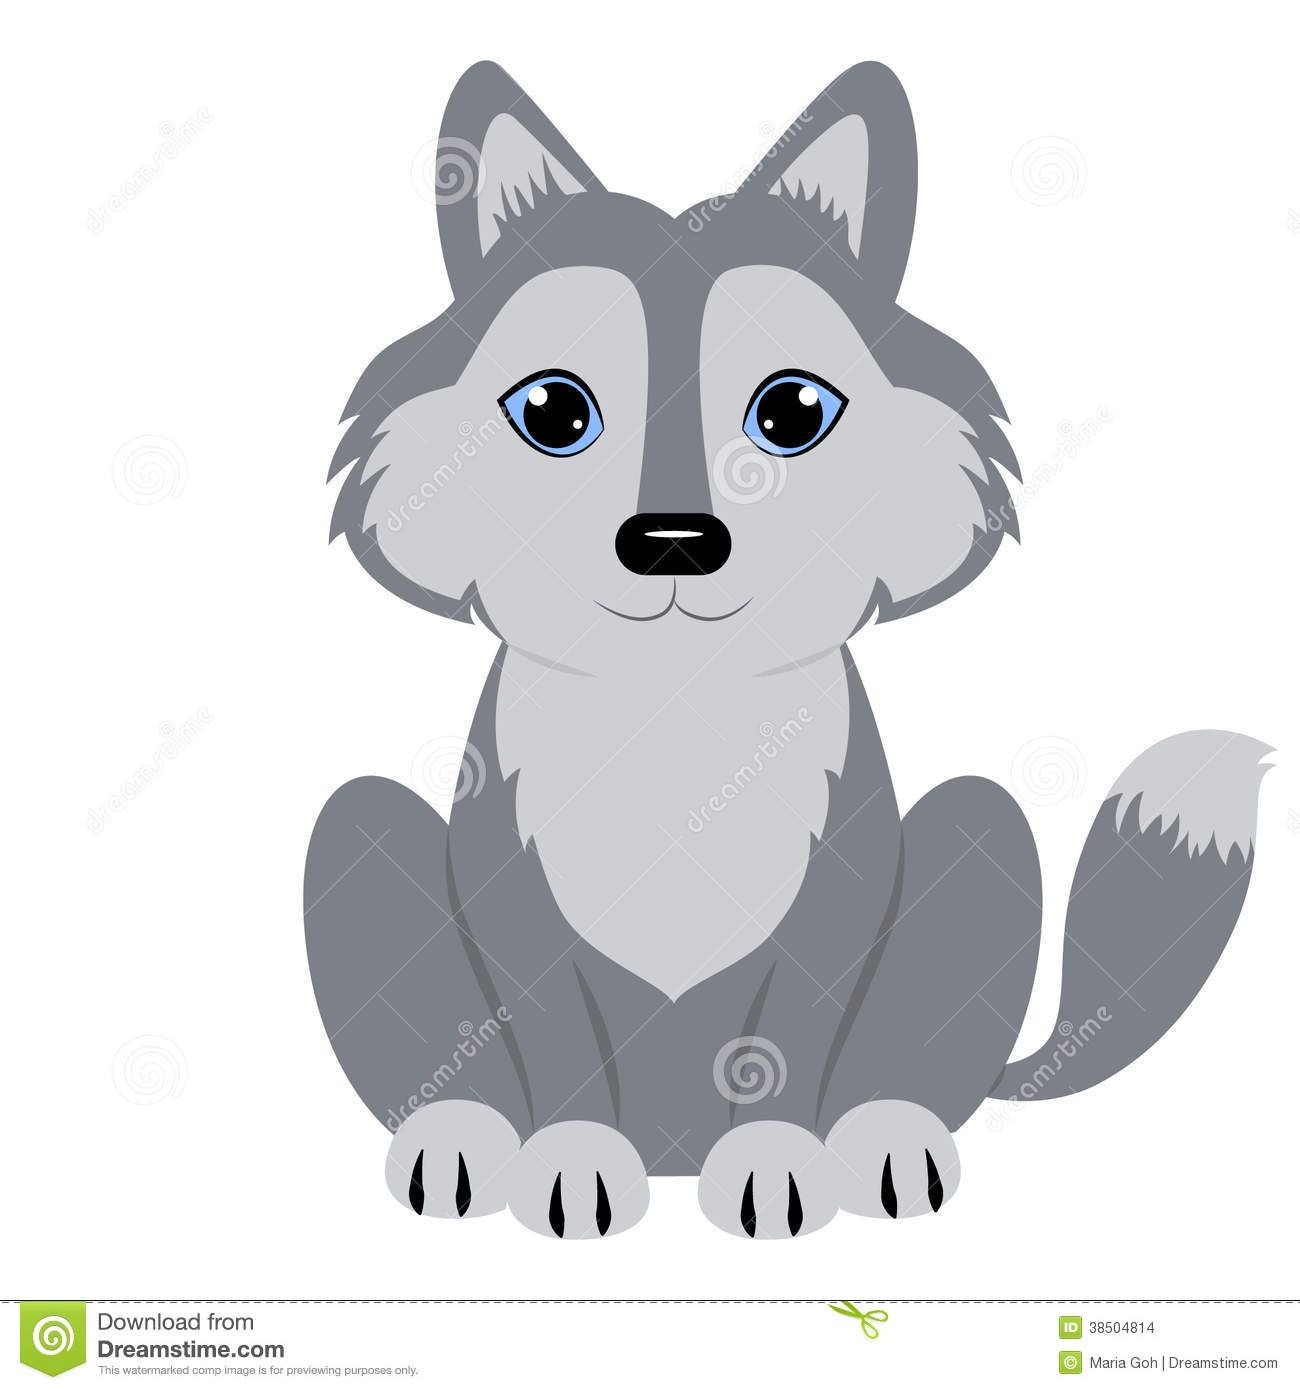 Wolves clipart cartoon. Wolf animals in 